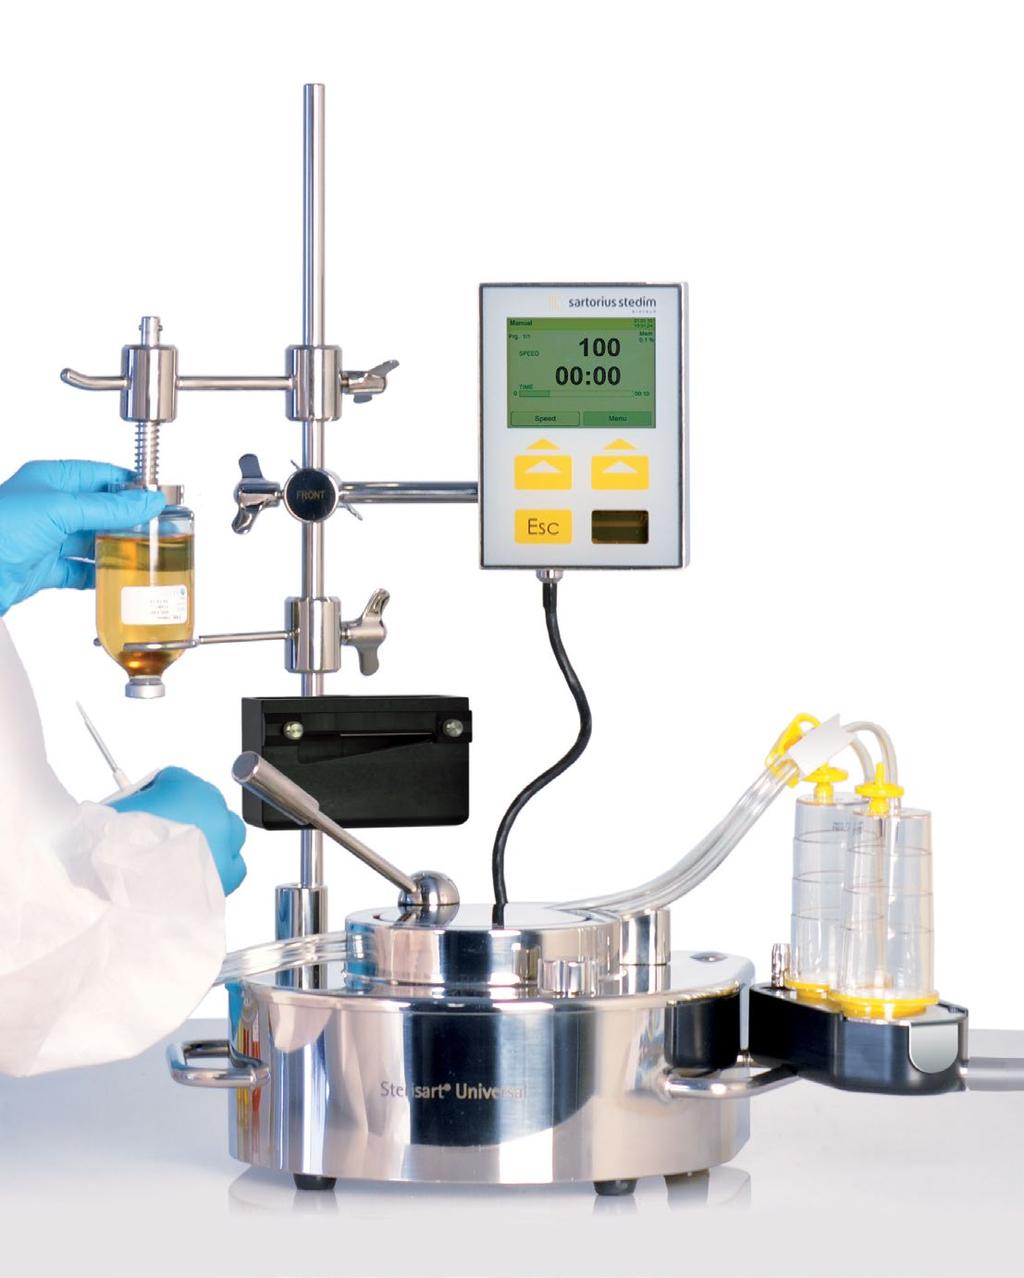 STERILITY TESTING OF YOUR FINISHED COMPOUNDED DRUG Sterisart UNIVERSAL PUMP STERILITY